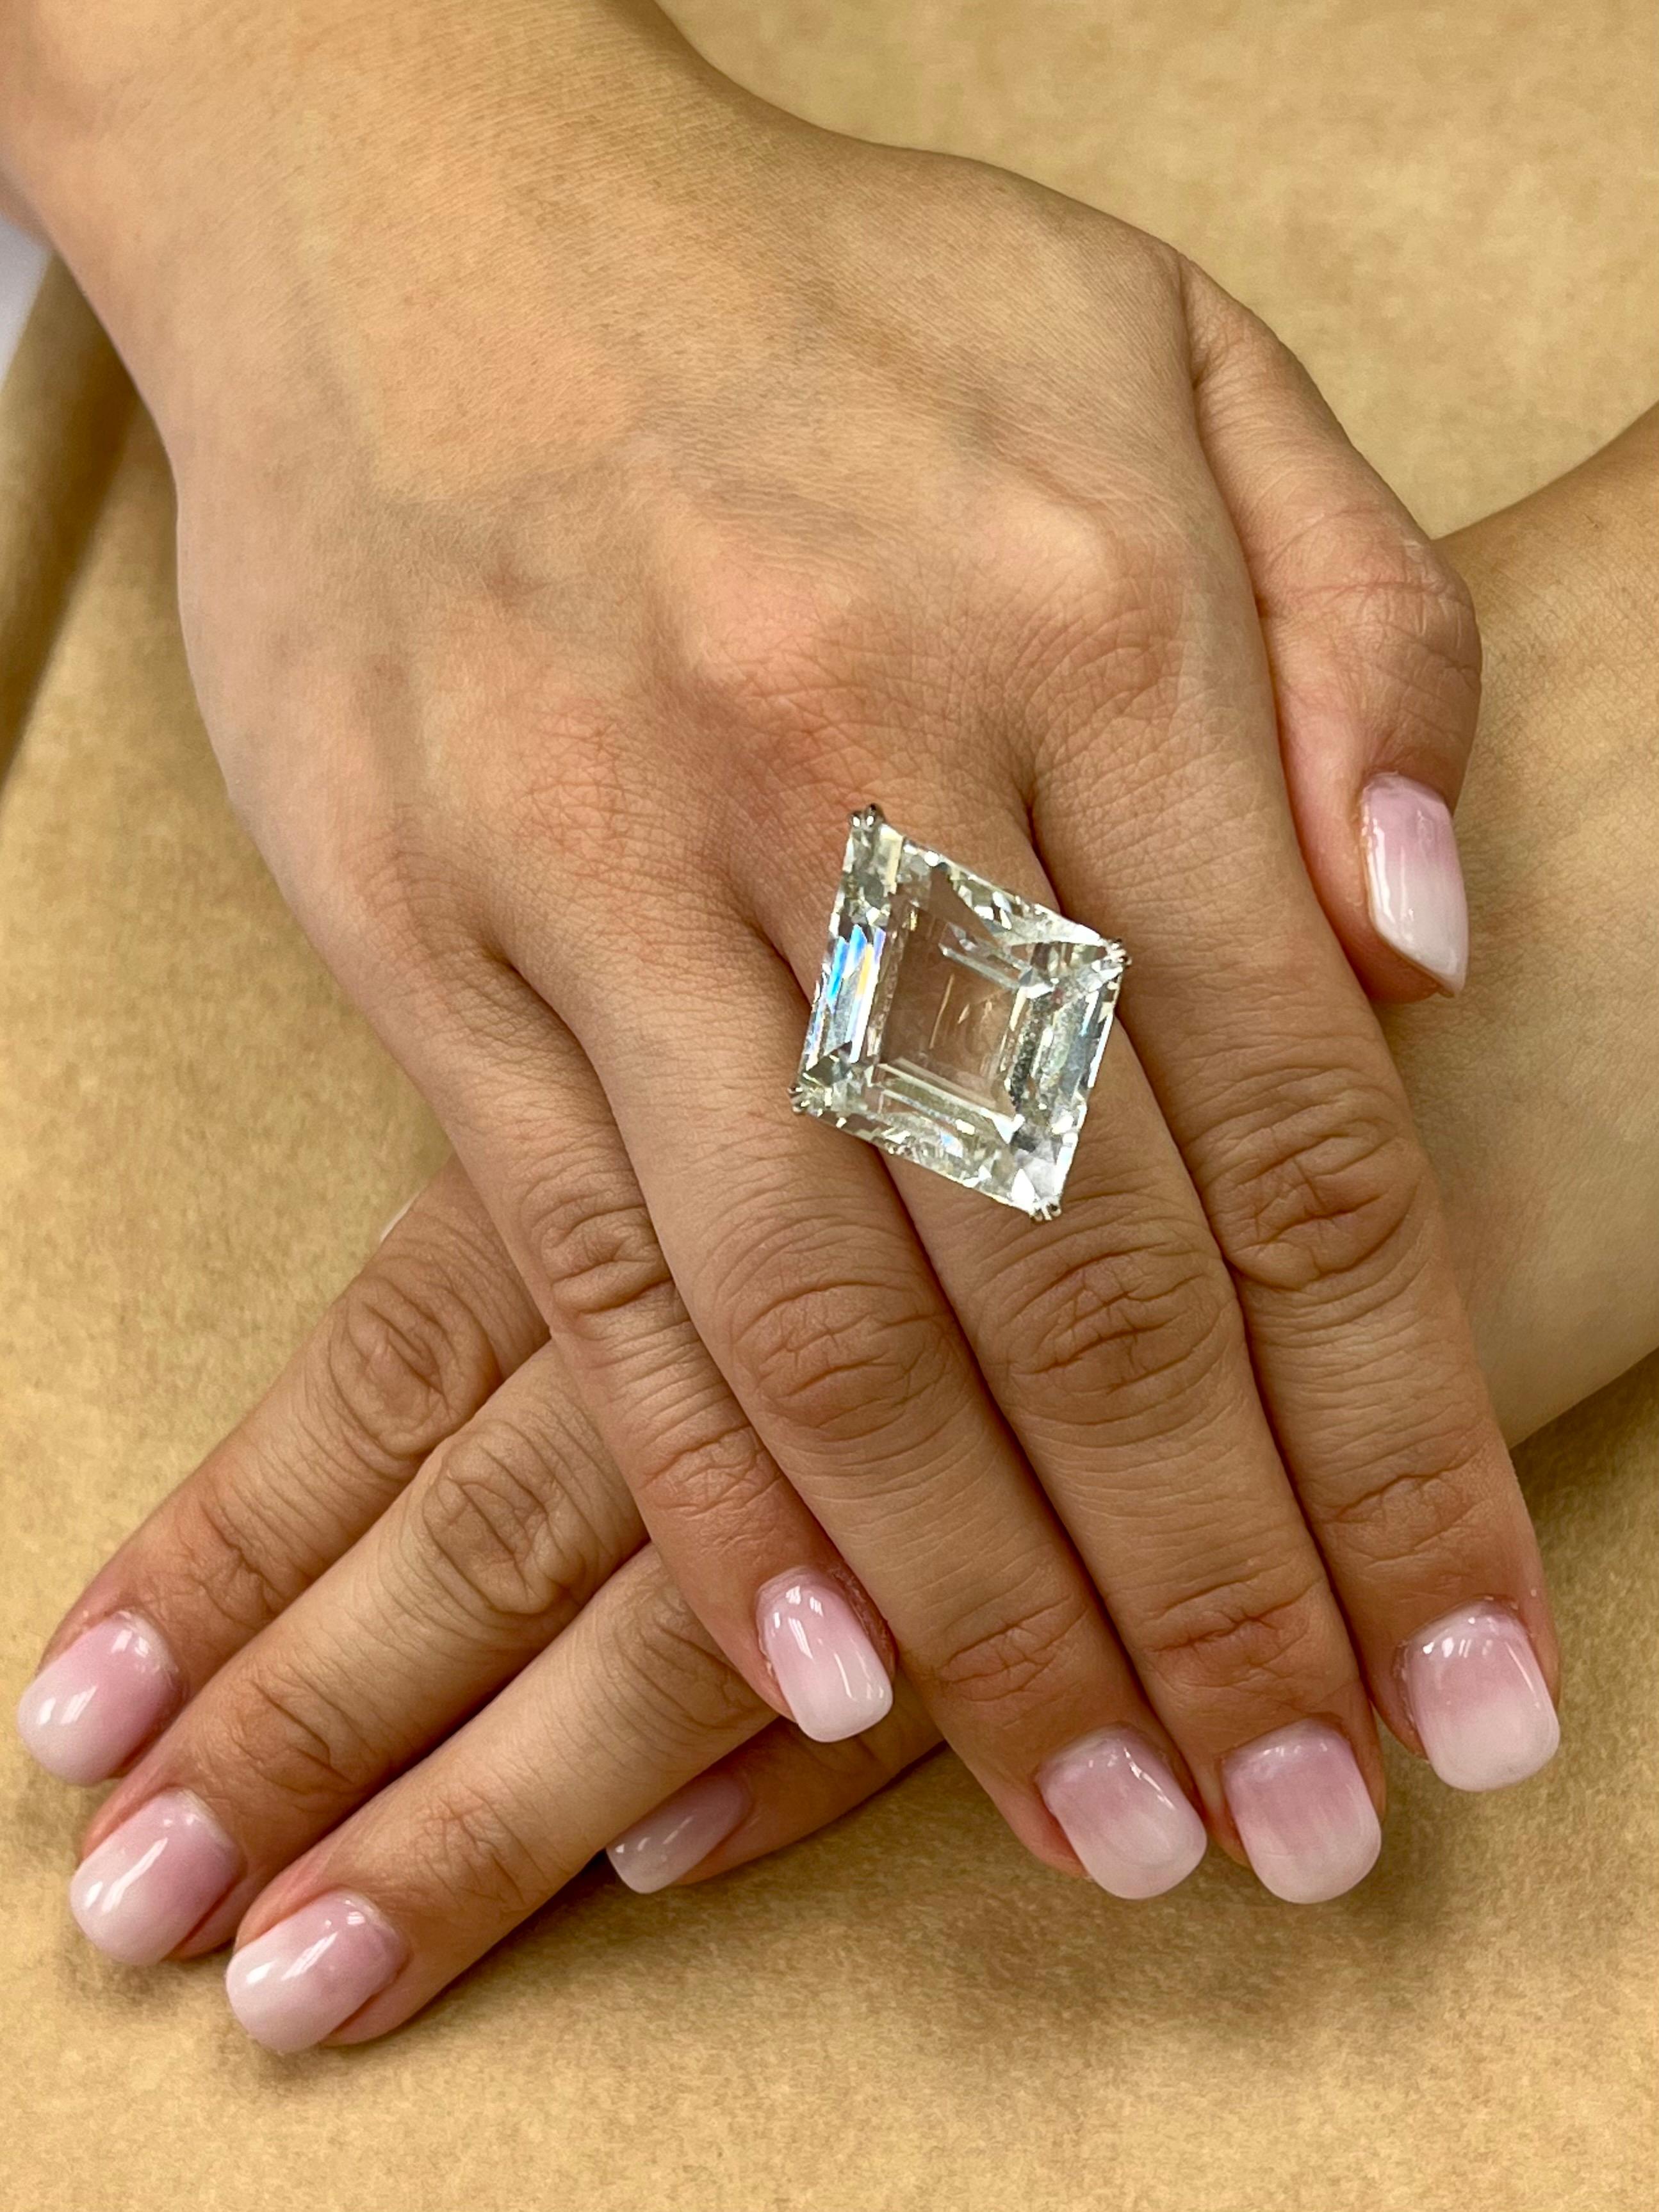 Please check out the HD video! Big statement piece! Here is a super nice white Topaz and diamond ring It is set in 18k Rose gold and 18k white gold. The center Topaz is a stunning 49.02Cts. Not only is the size impressive, the diamond shaped / kite